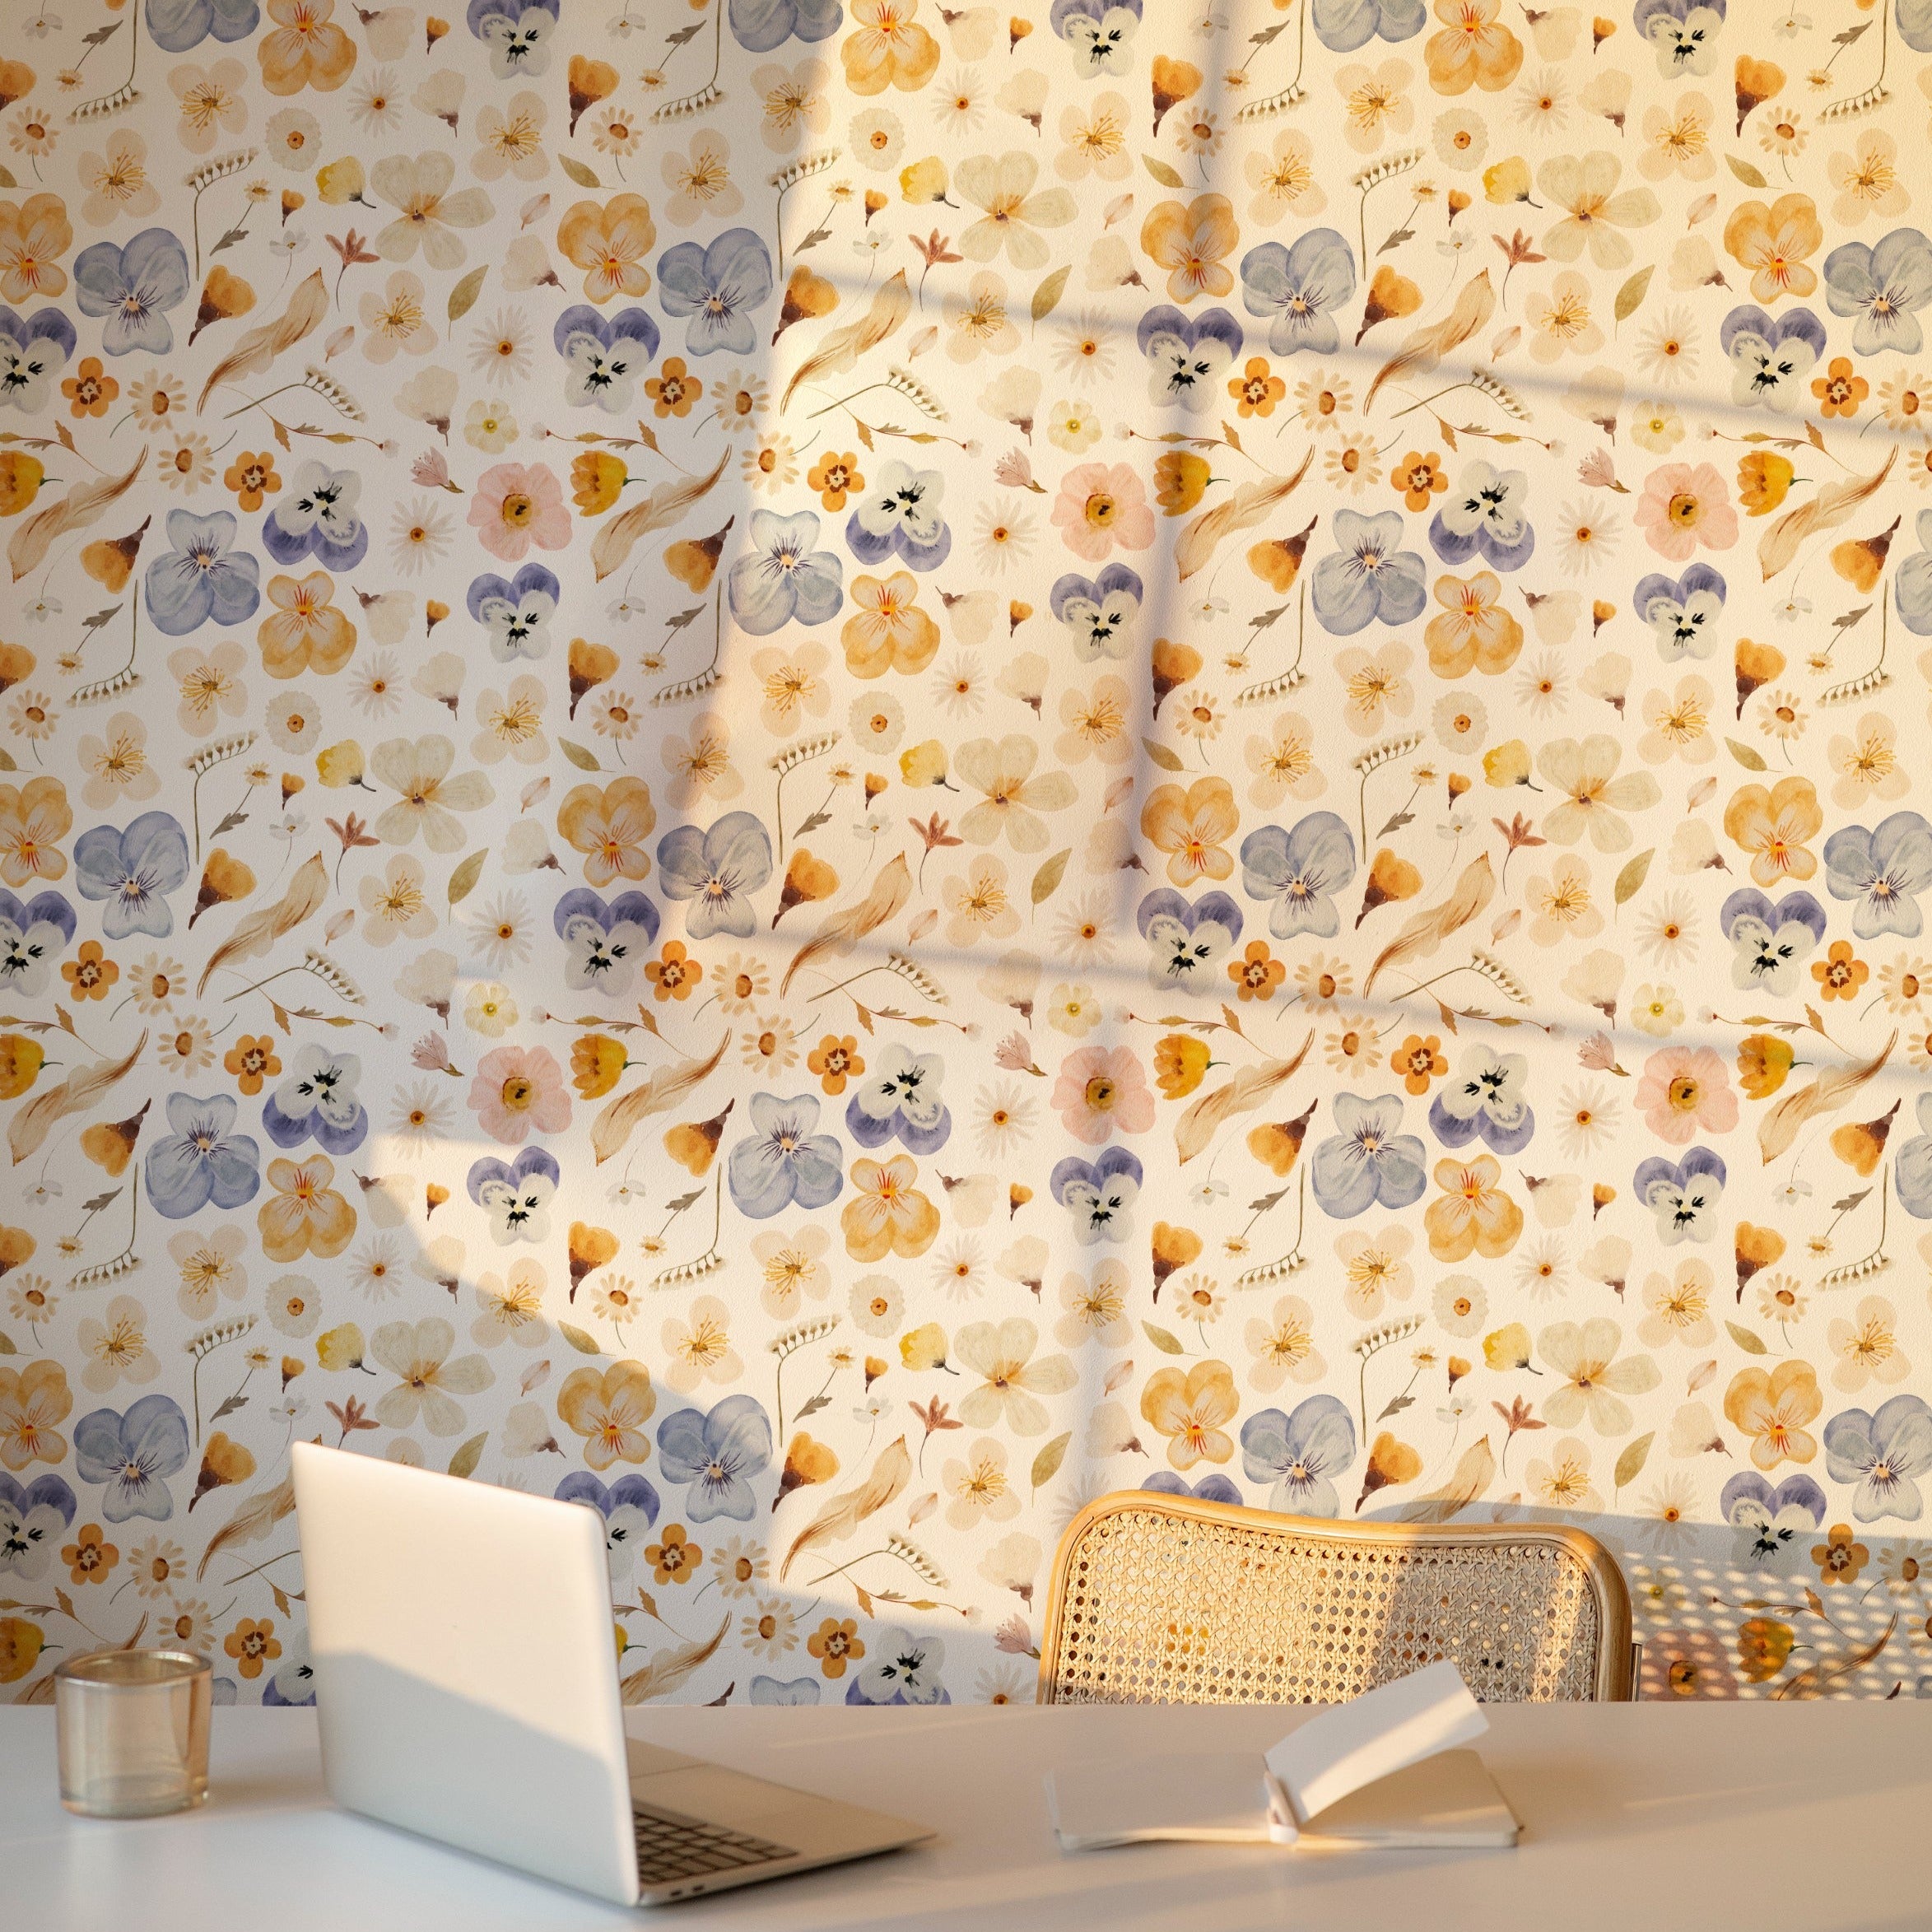 A workspace enhanced by the Blooming Boho Floral Wallpaper, featuring a modern desk with a laptop and a chair against a backdrop of the floral pattern. The wallpaper's lively yet soothing design creates an inspiring and pleasant working environment.